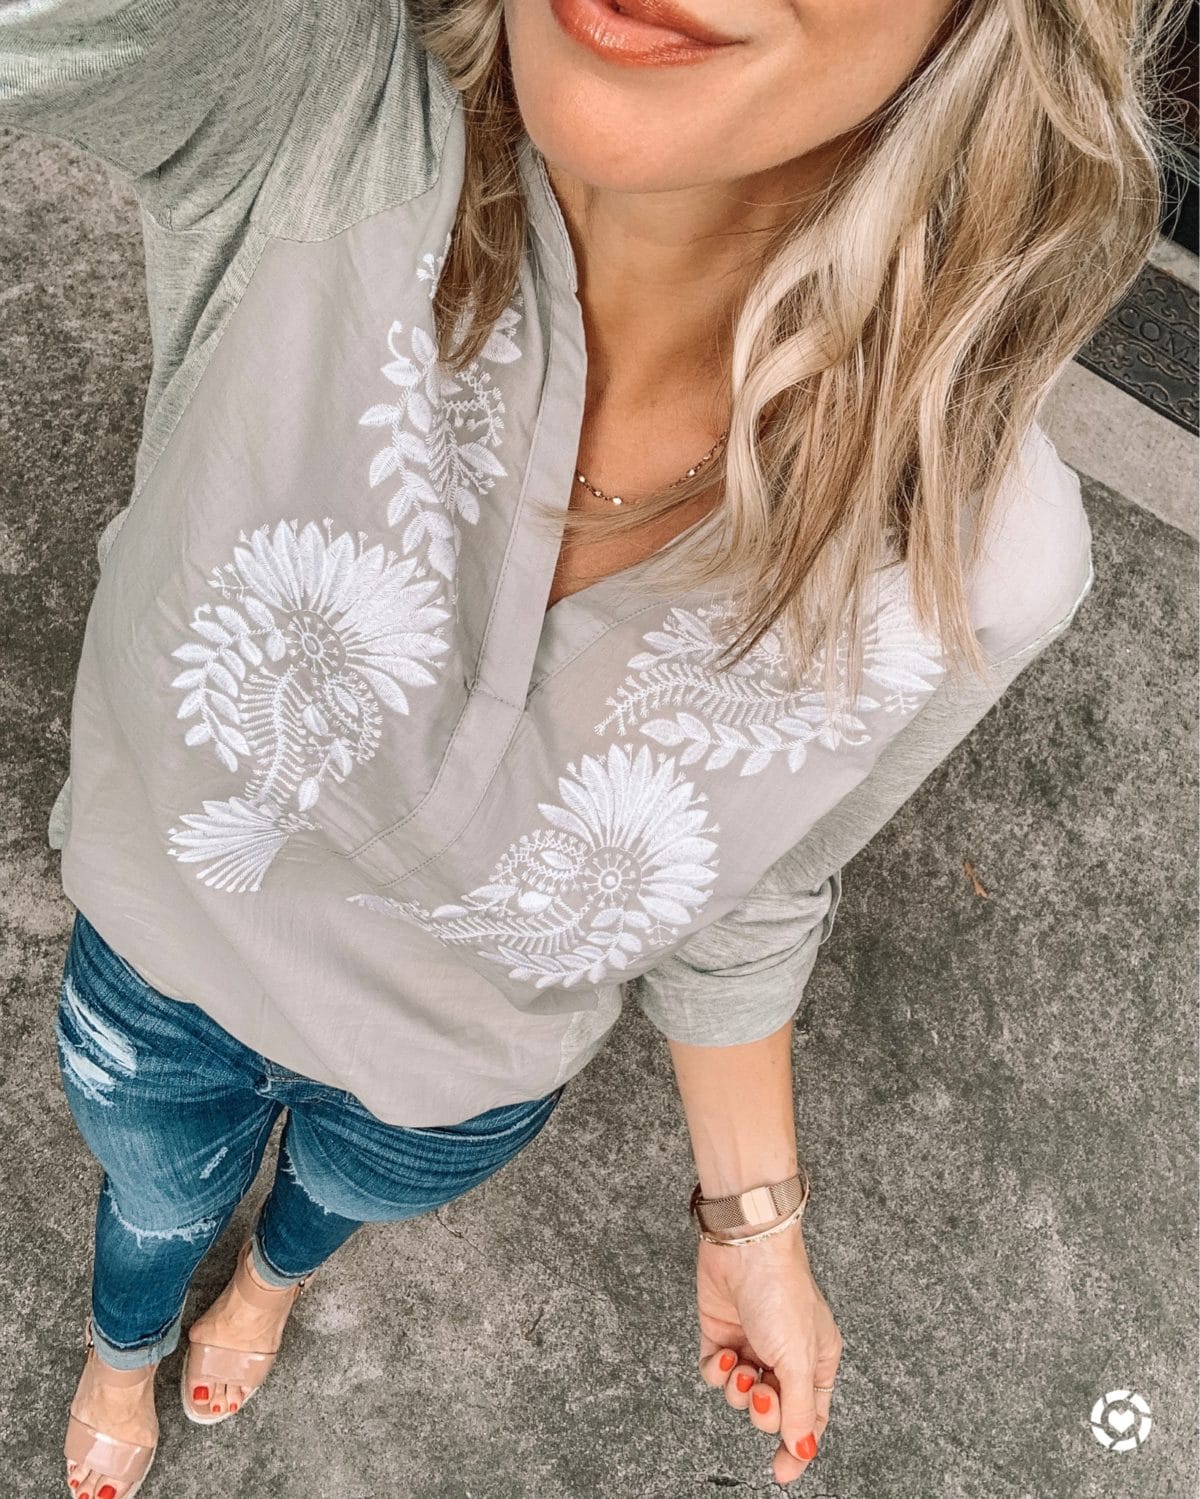 Amazon Fashion Prime Day Haul - grey and white embroidered top with jeans